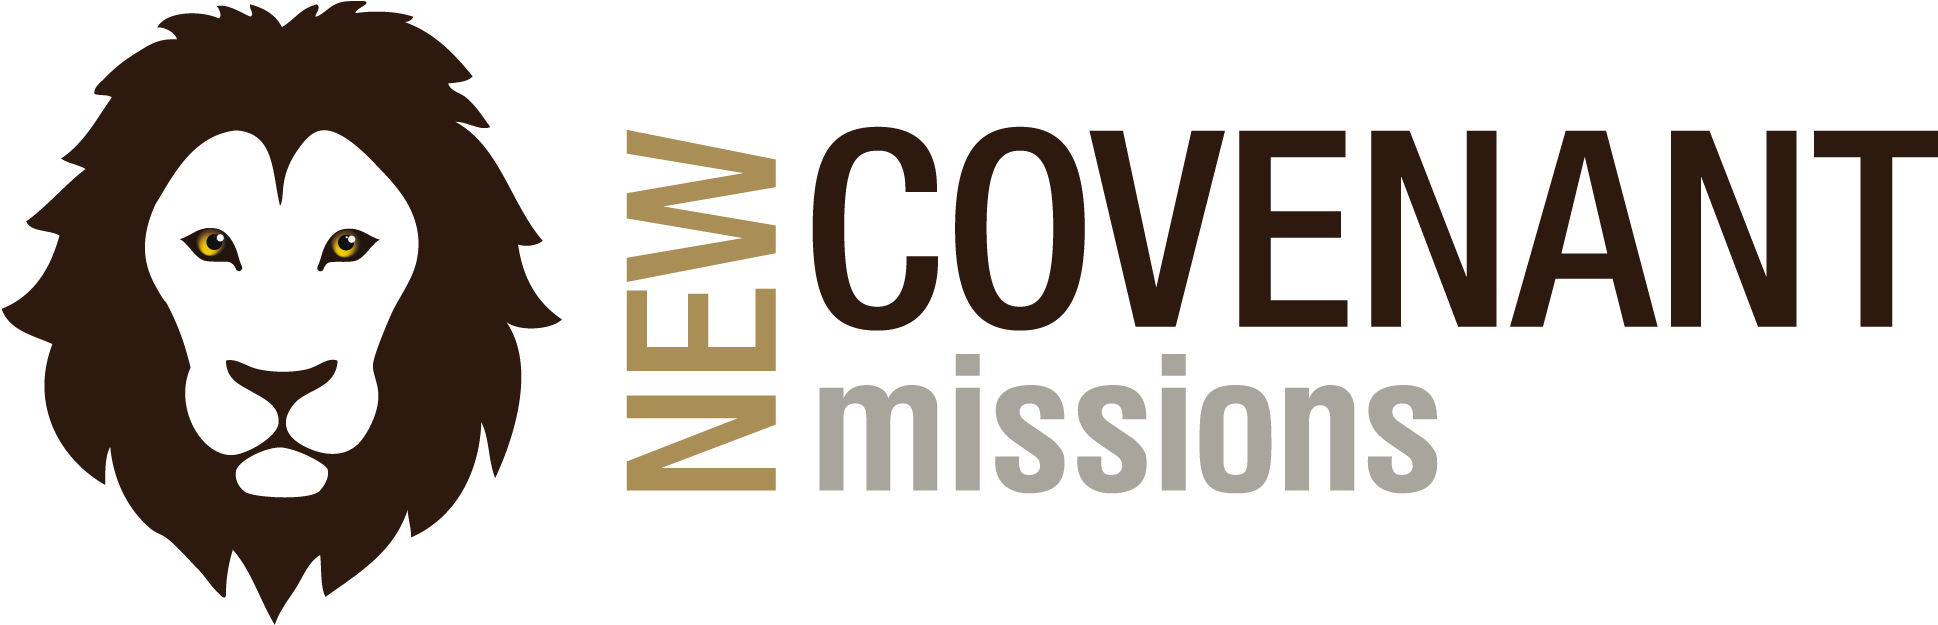 New Covenant Missions - Ccna Voice Study Guide: Exam 640-460 (1991x668)